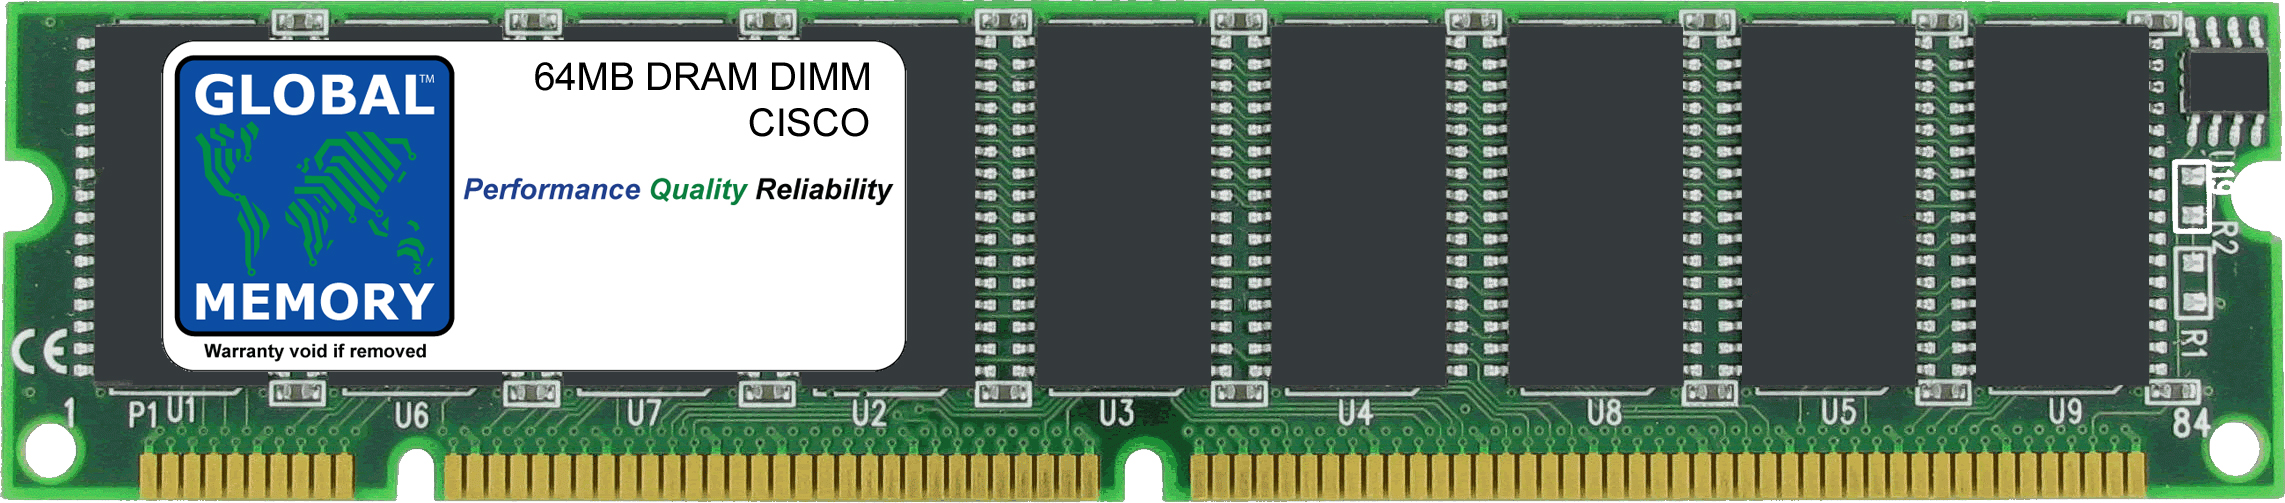 64MB DRAM DIMM MEMORY RAM FOR CISCO 7500 SERIES ROUTERS ROUTE SWITCH PROCESSOR 4 (MEM-RSP4-64M) - Click Image to Close